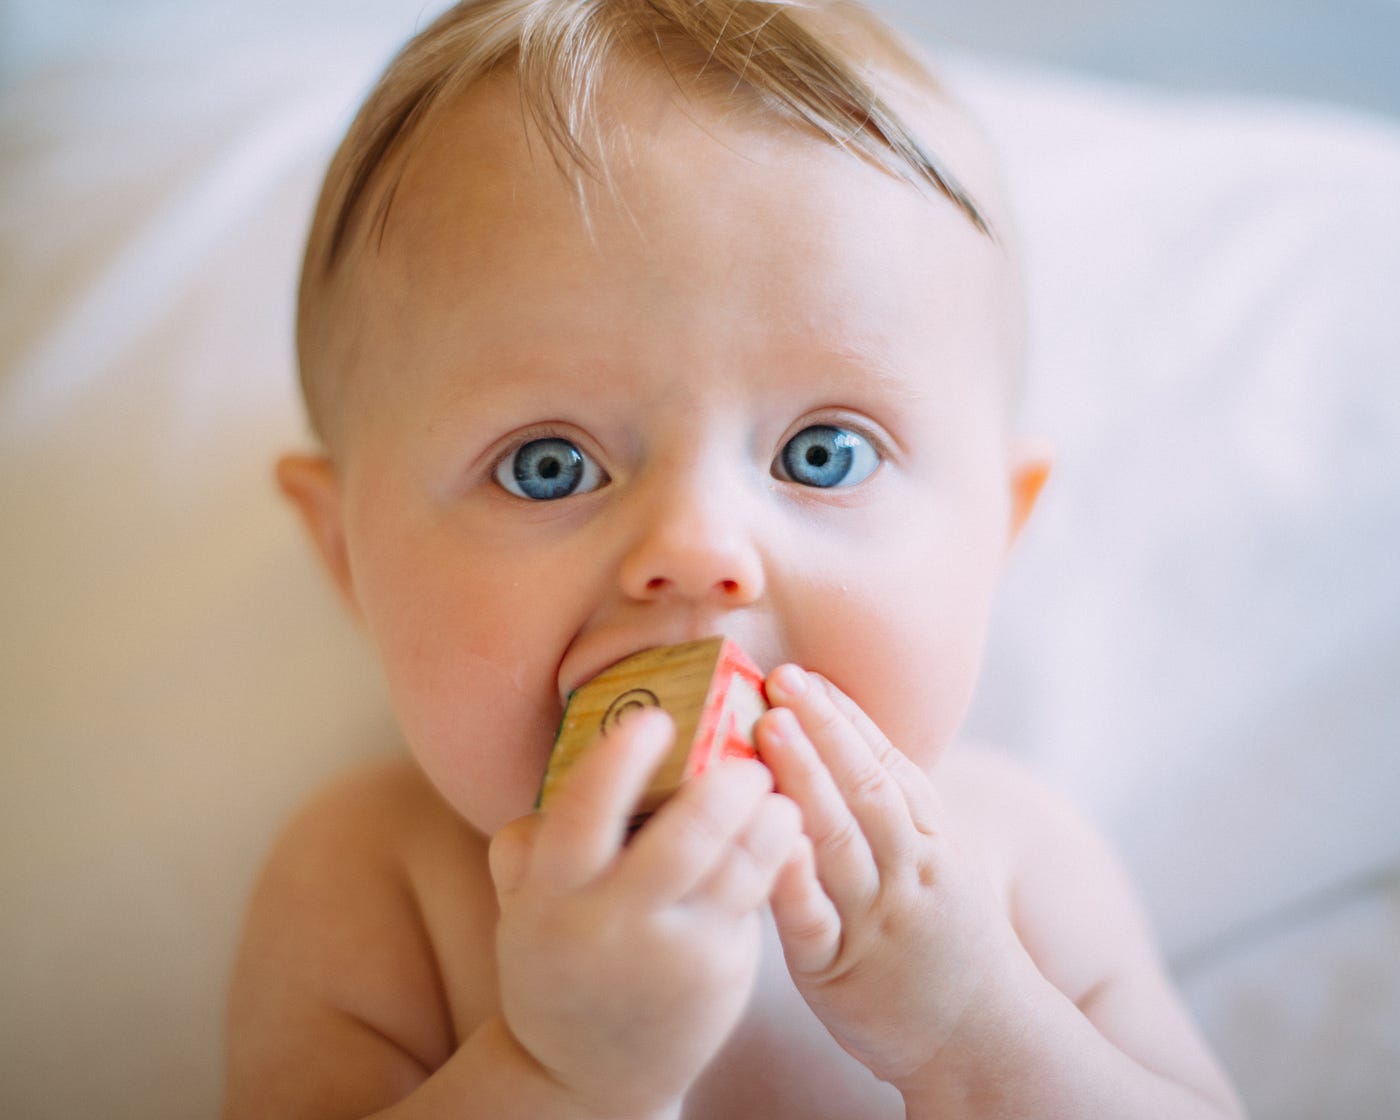 A white baby, with bright blue eyes, stares at us, his hands pushing a wooden block into his mouth. Autism Spectrum Disorder (ASD) is a neurological and developmental disorder that affects communication, social interaction, and behavior. It is called a “spectrum” disorder because the symptoms and severity can vary widely among individuals with the condition.